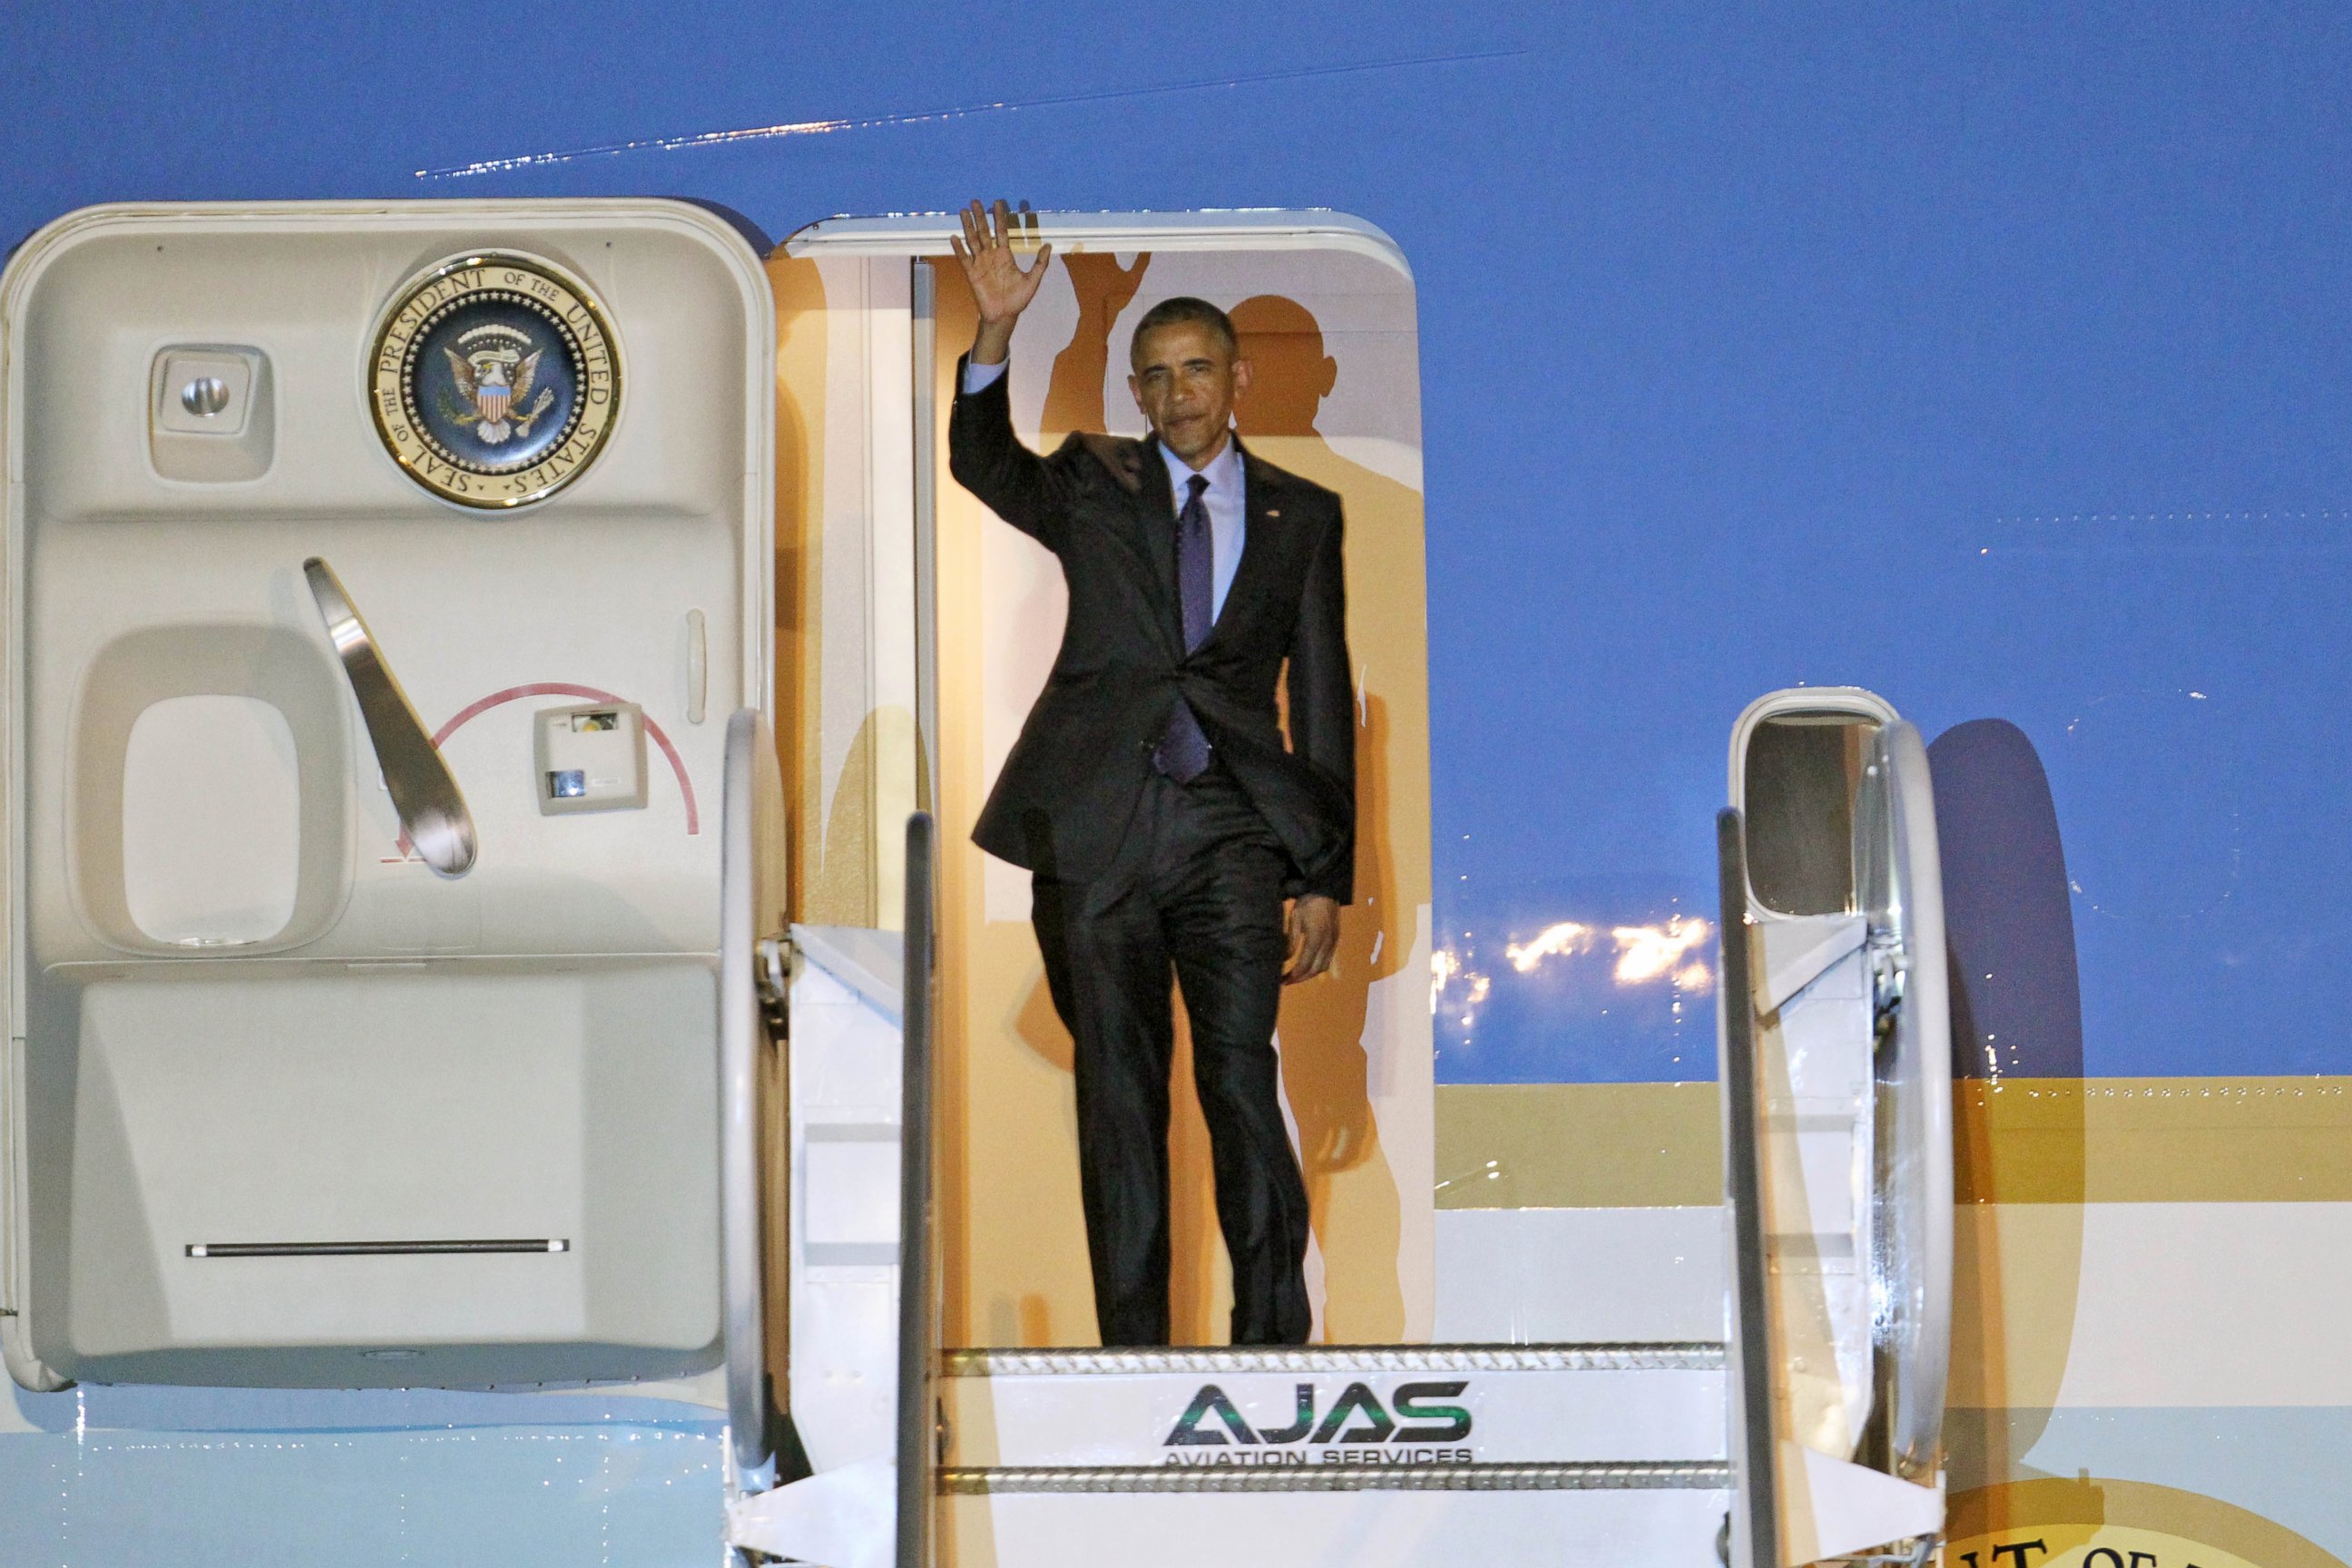 PHOTO: President Barack Obama waves during his arrival on Air Force One, April 8, 2015, at Norman Manley International Airport in Kingston, Jamaica.